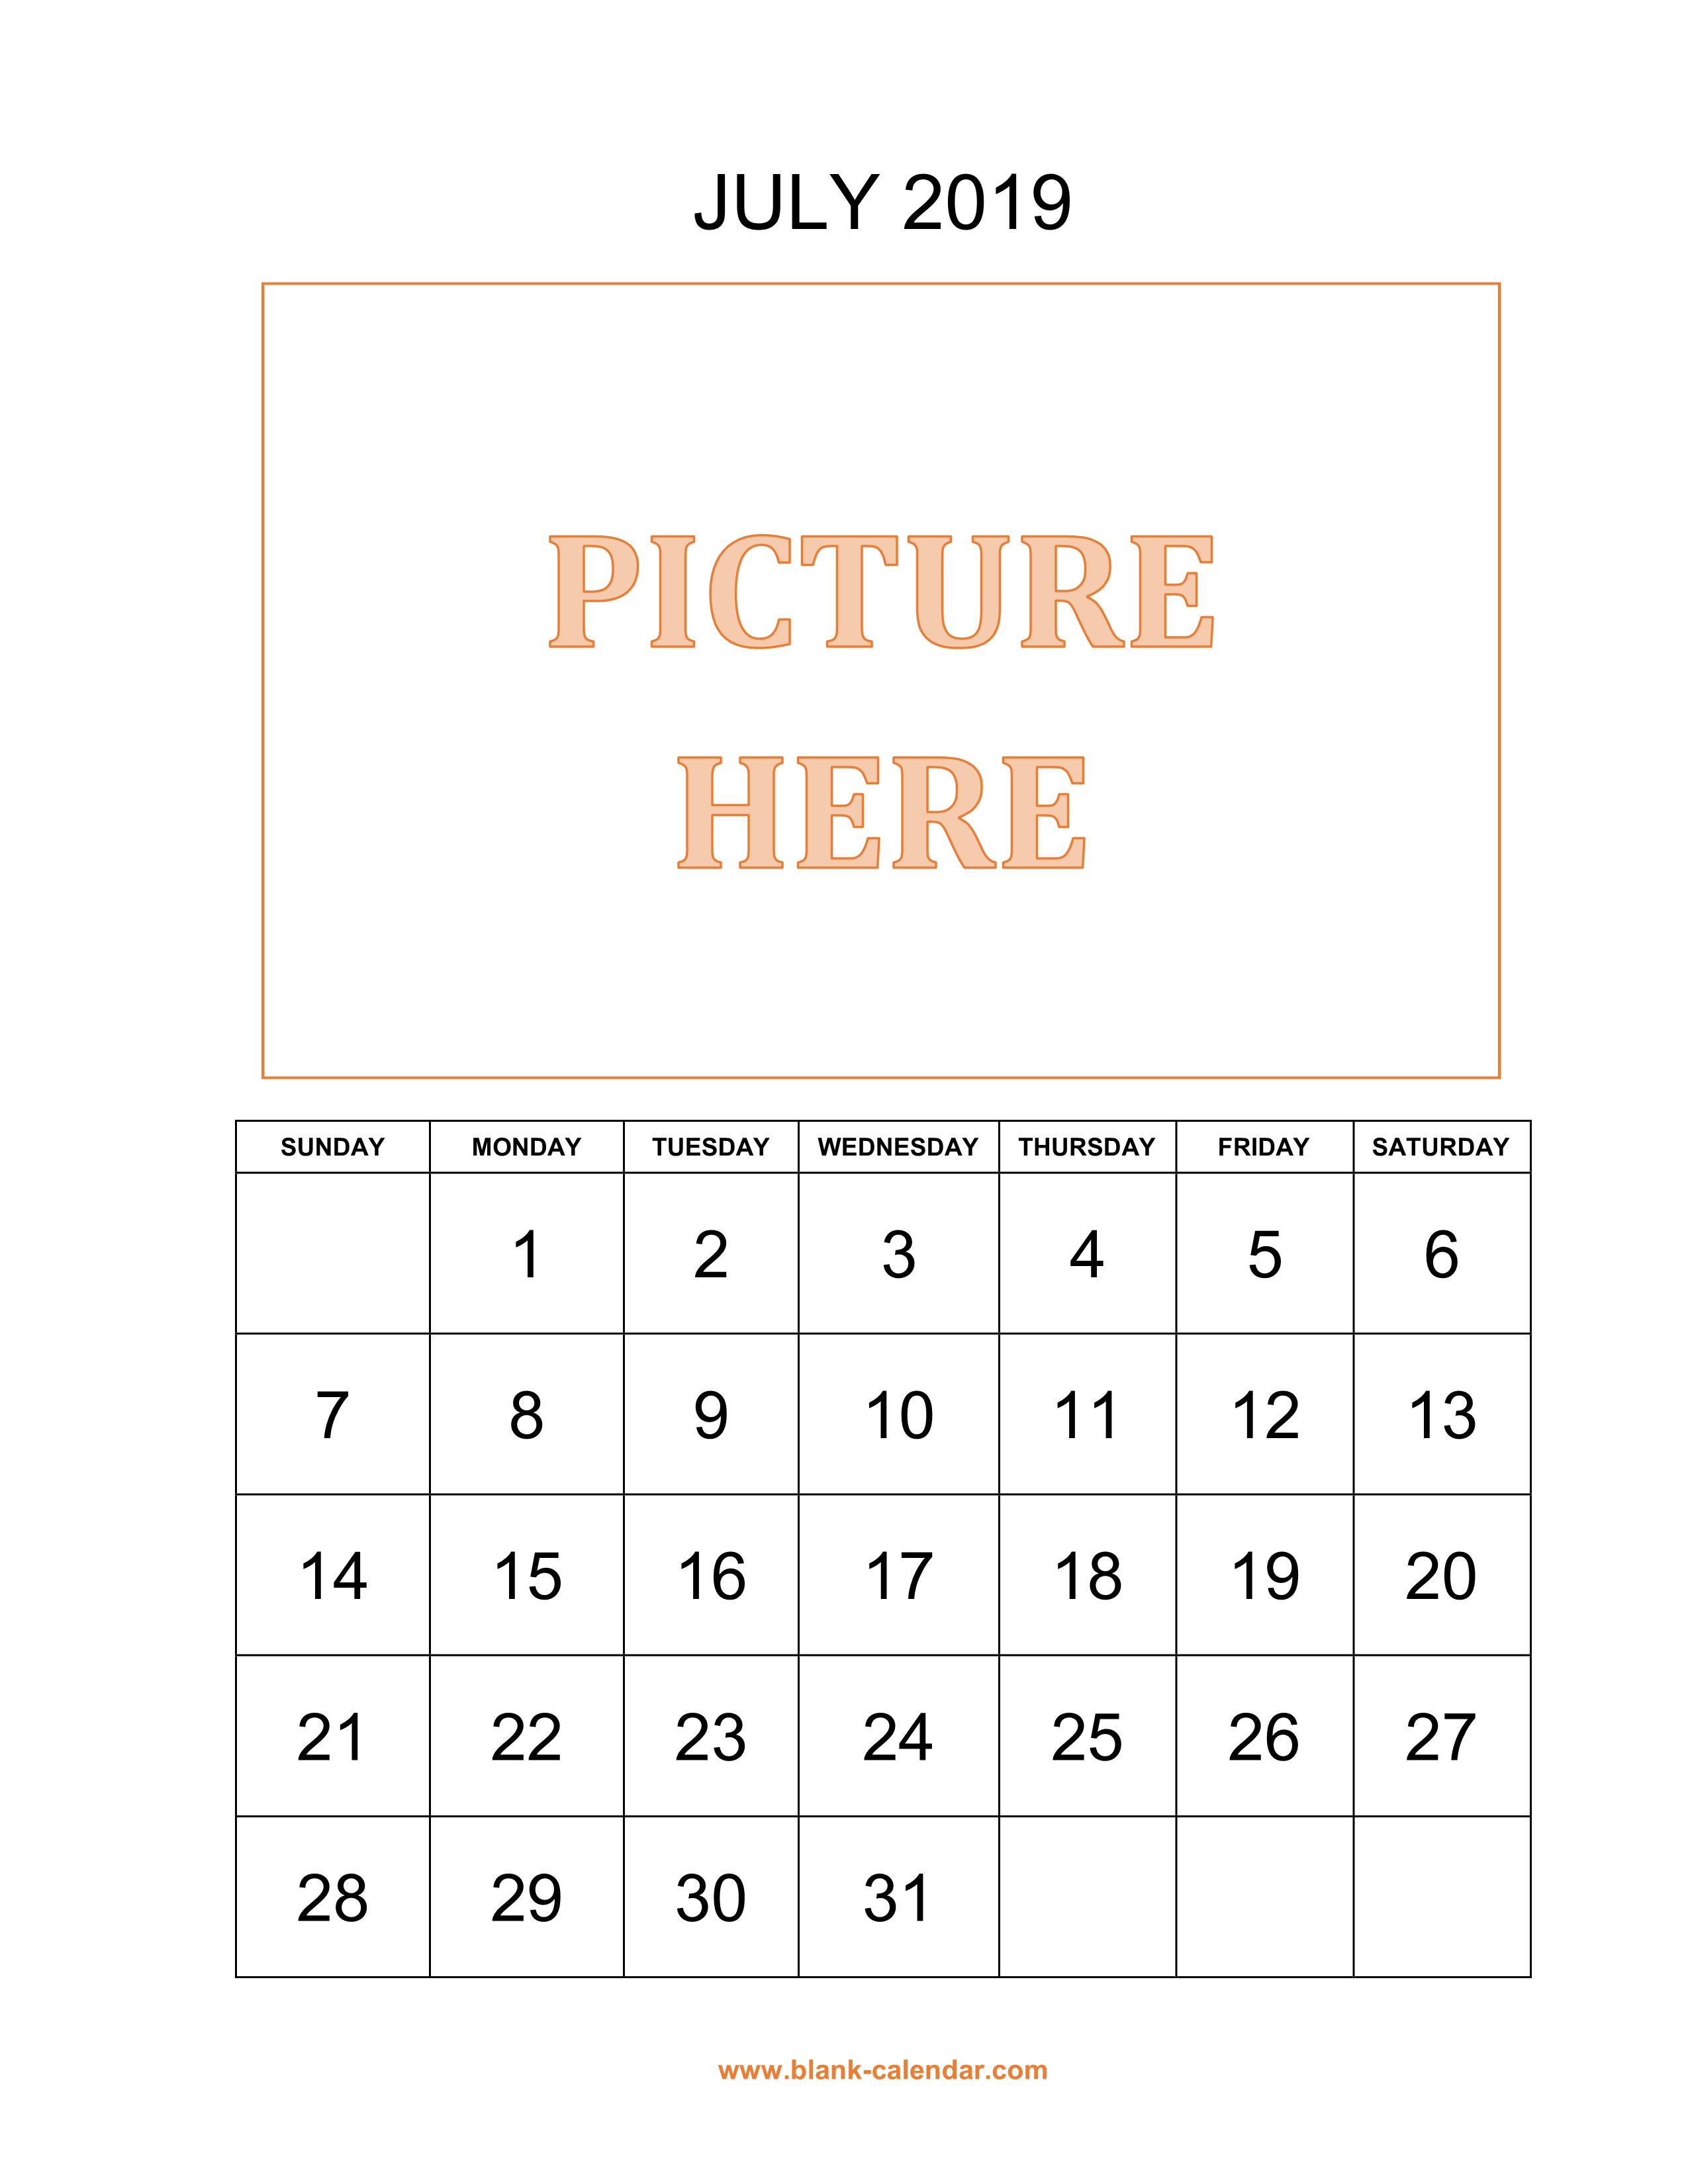 free-download-printable-july-2019-calendar-pictures-can-be-placed-at-the-top